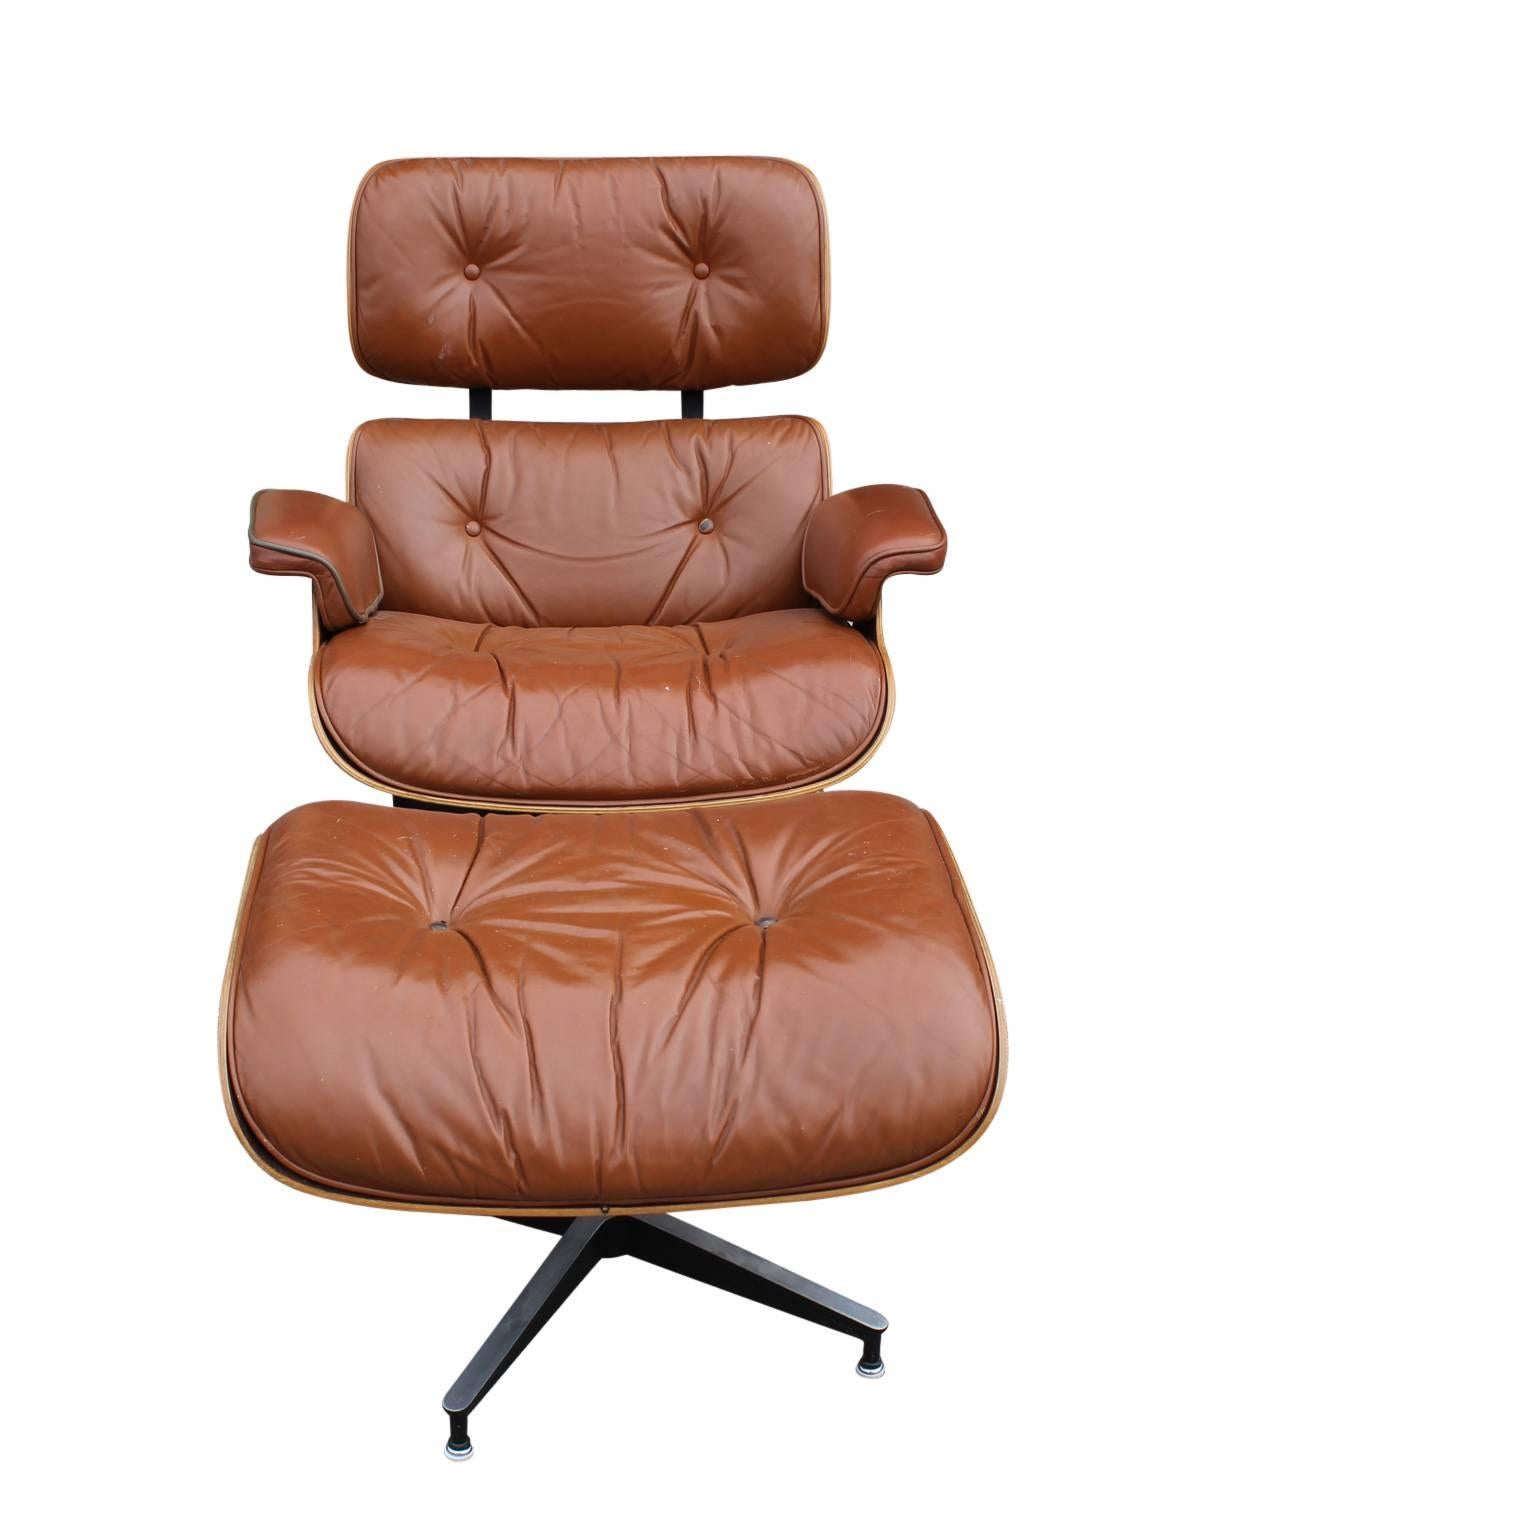 Great Eames rosewood lounge chair for Herman Miller circa 1960s/ 1970s. The chair is in light brown and in nice vintage condition with light wear. 